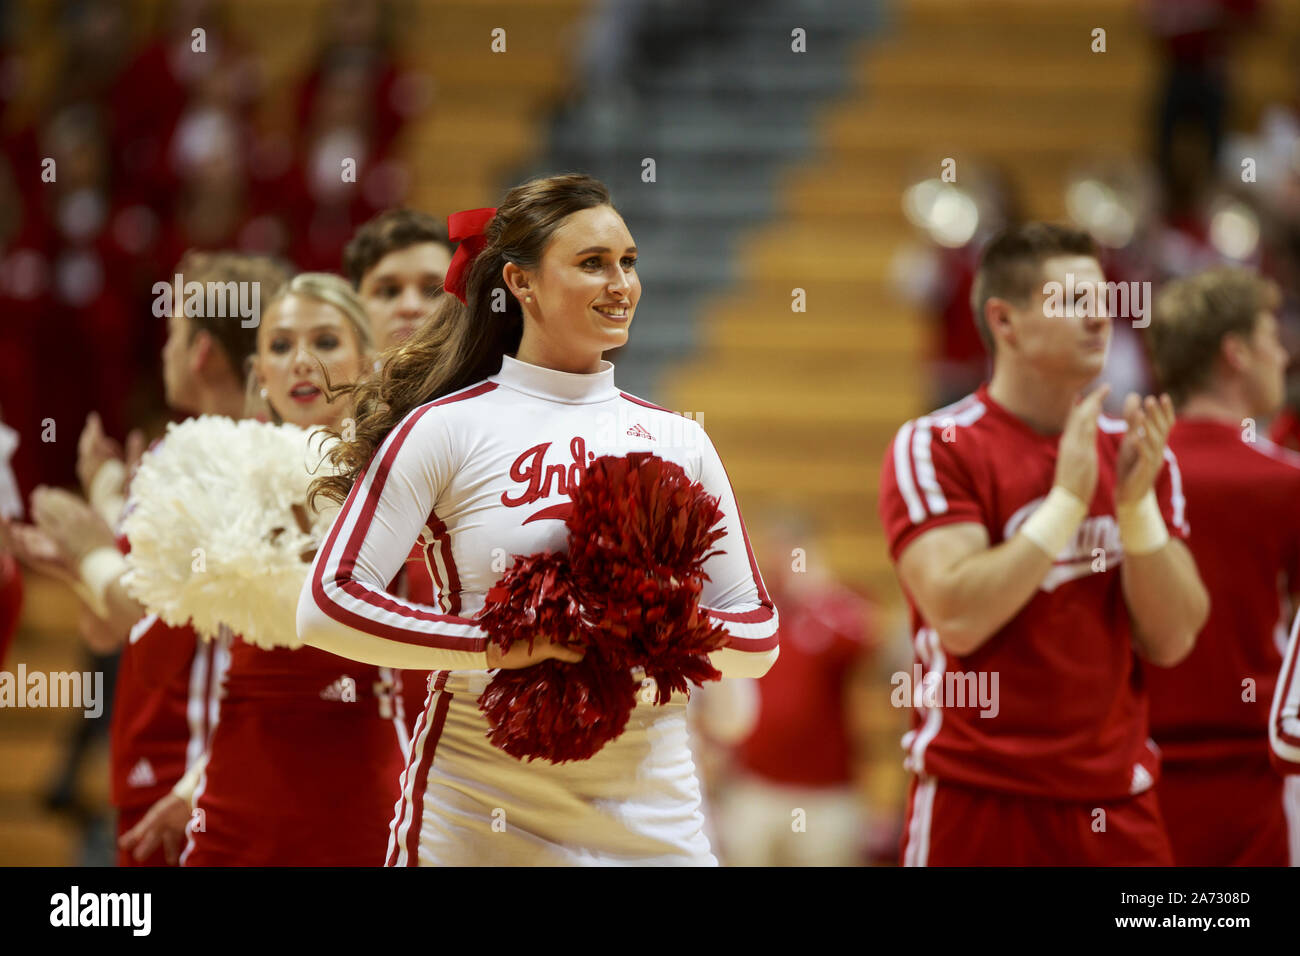 Indiana University's cheerleaders cheer against Gannon during an NCAA exhibition basketball game, Tuesday, Oct., 29, 2019 at Simon Skjodt Assembly Hall in Bloomington, Ind. Indiana beat Gannon 84 to 54. (Photo by Jeremy Hogan/The Bloomingtonian) Stock Photo